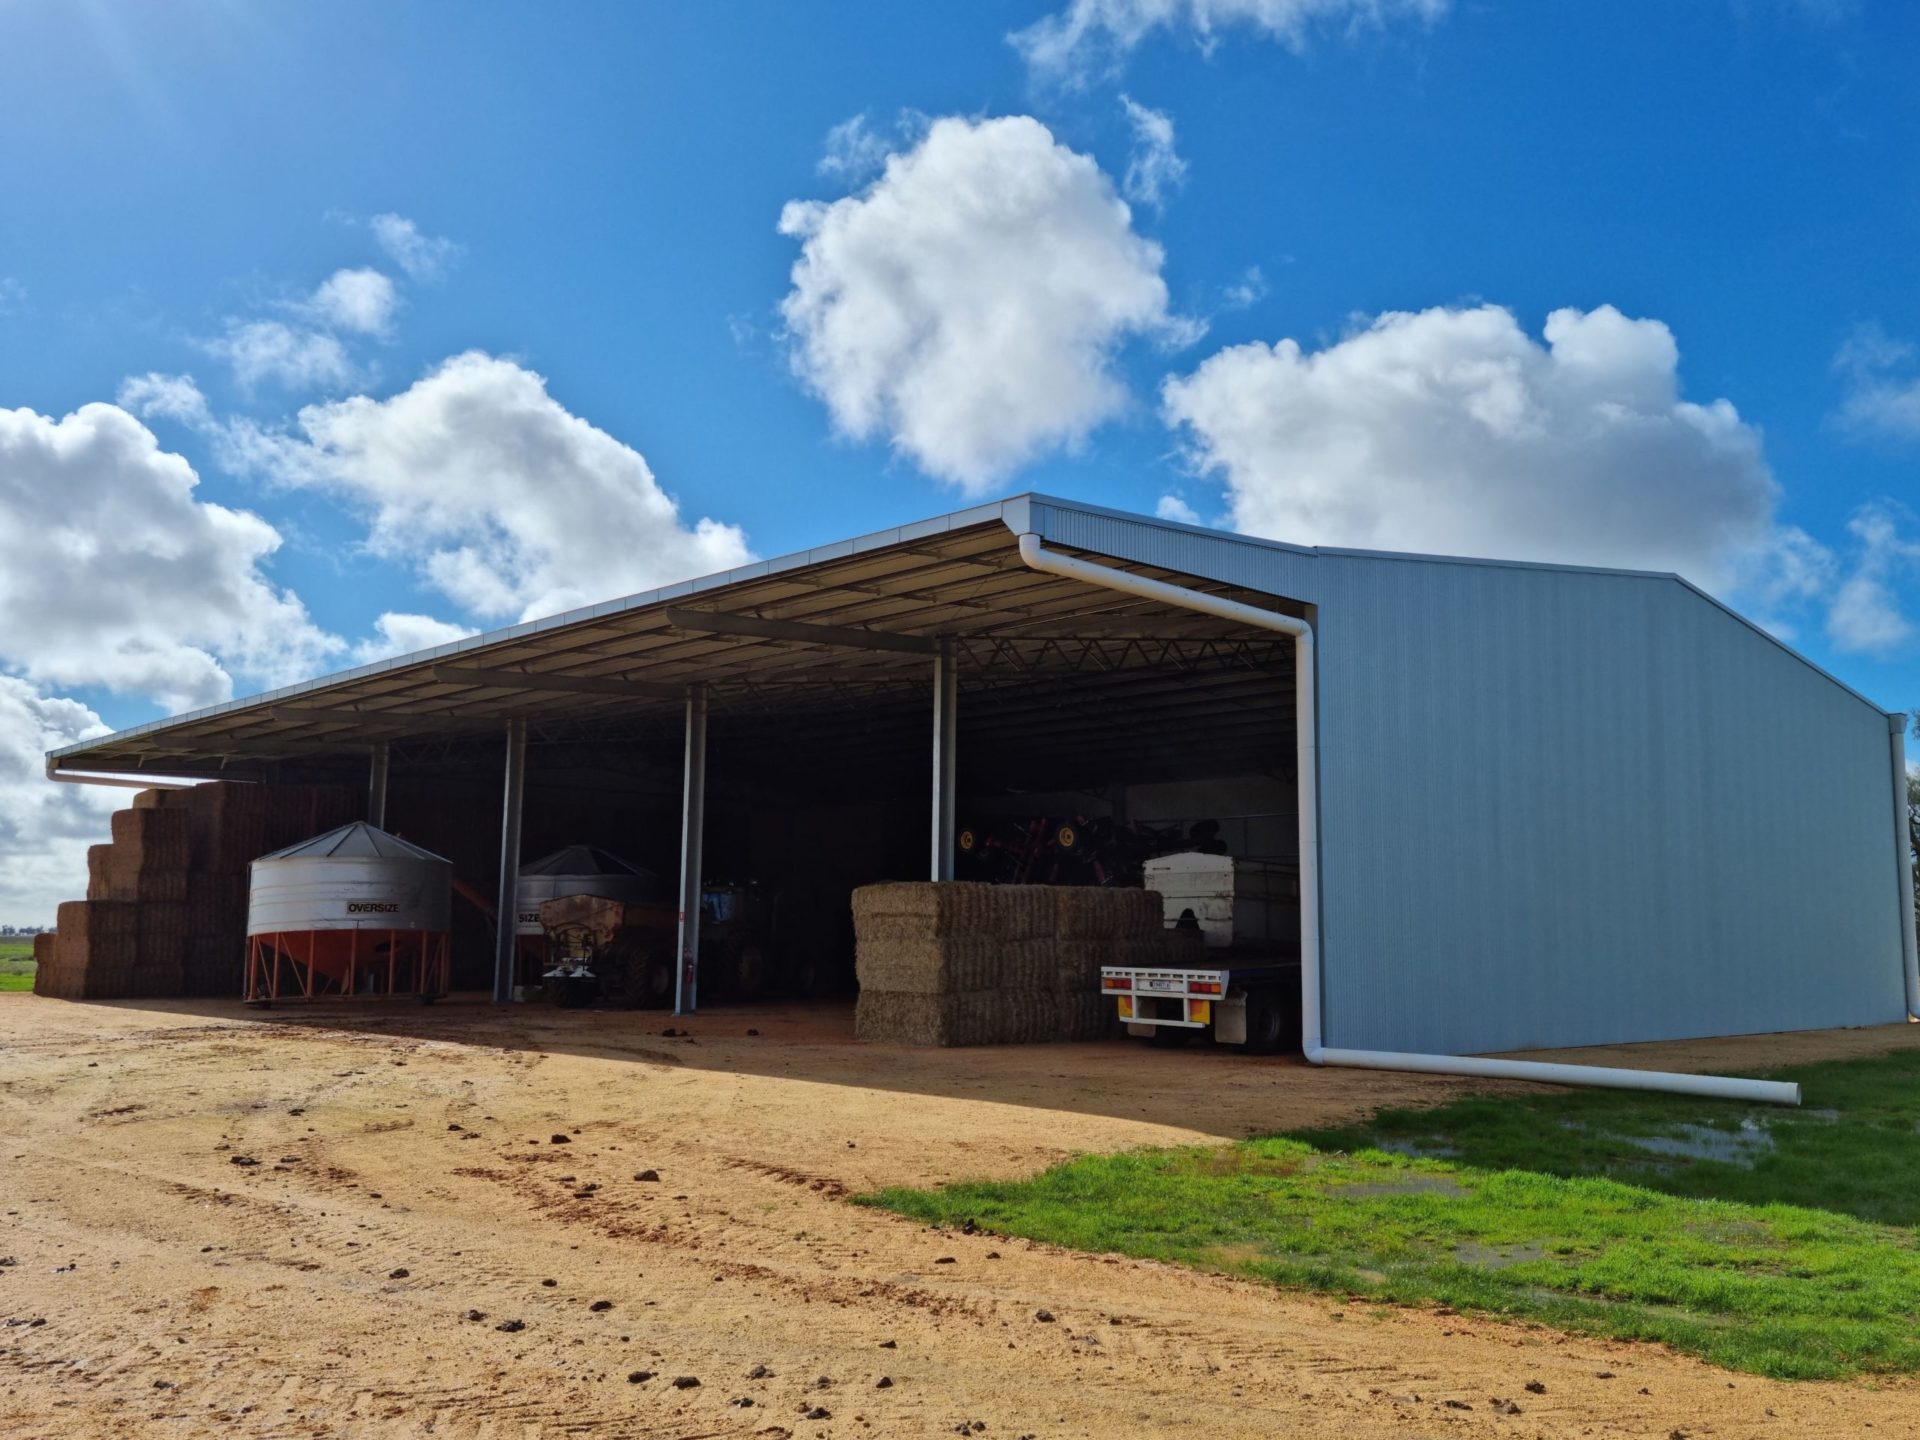 You are currently viewing 42.5m x 24m x 7.5m open-front hay shed with 6m canopy